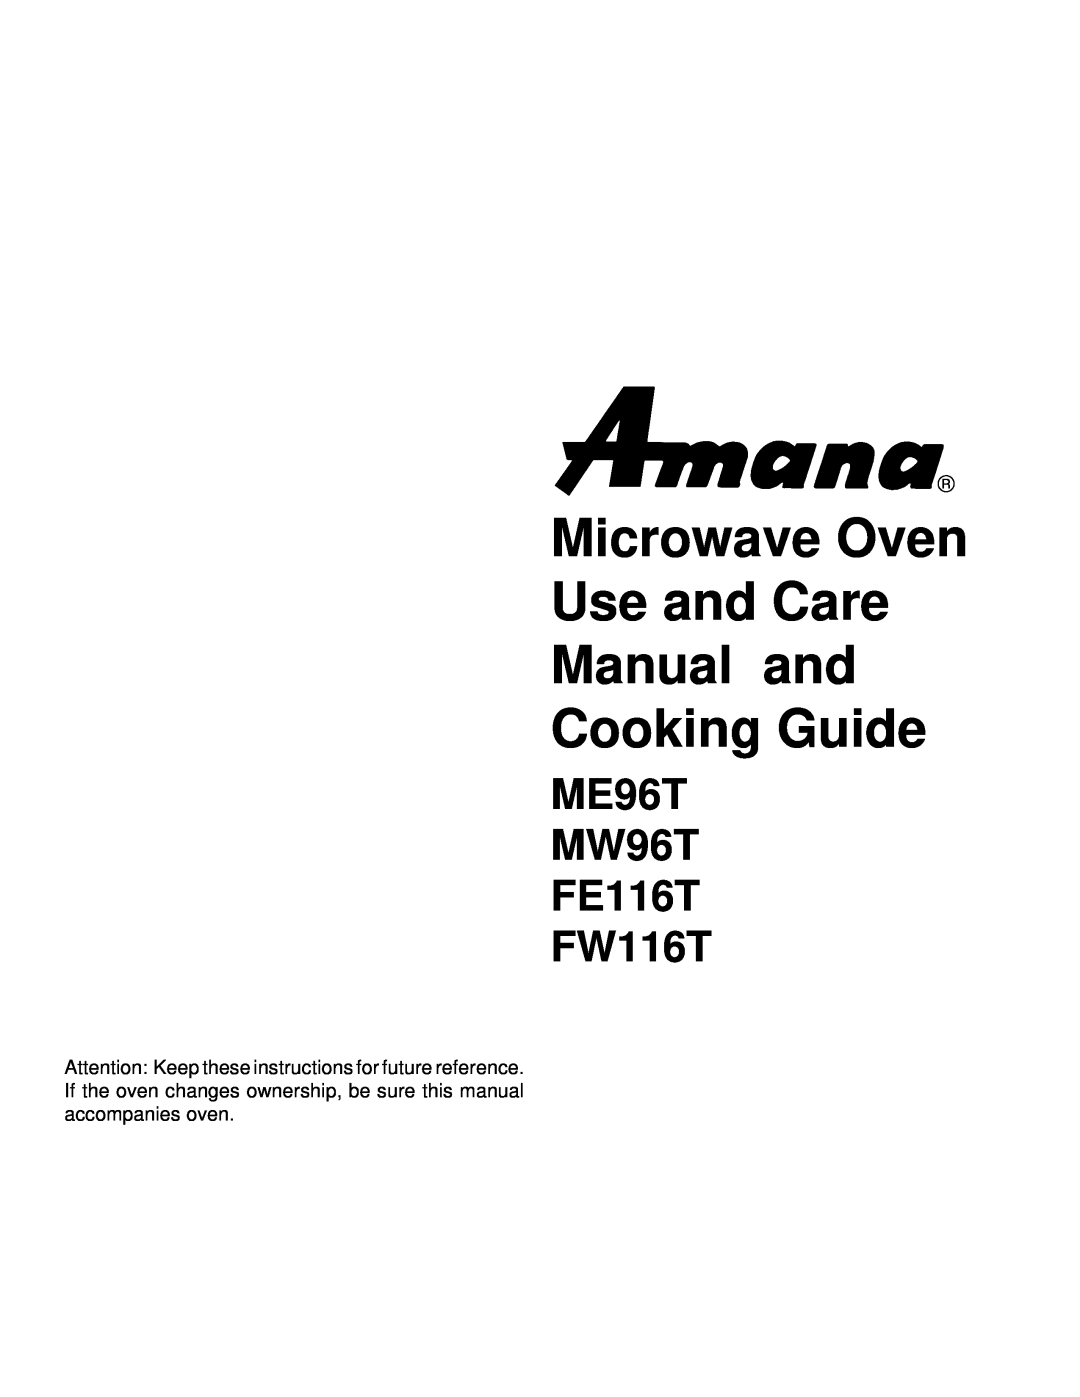 Amana manual Microwave Oven Use and Care Manual and Cooking Guide, ME96T MW96T FE116T FW116T 